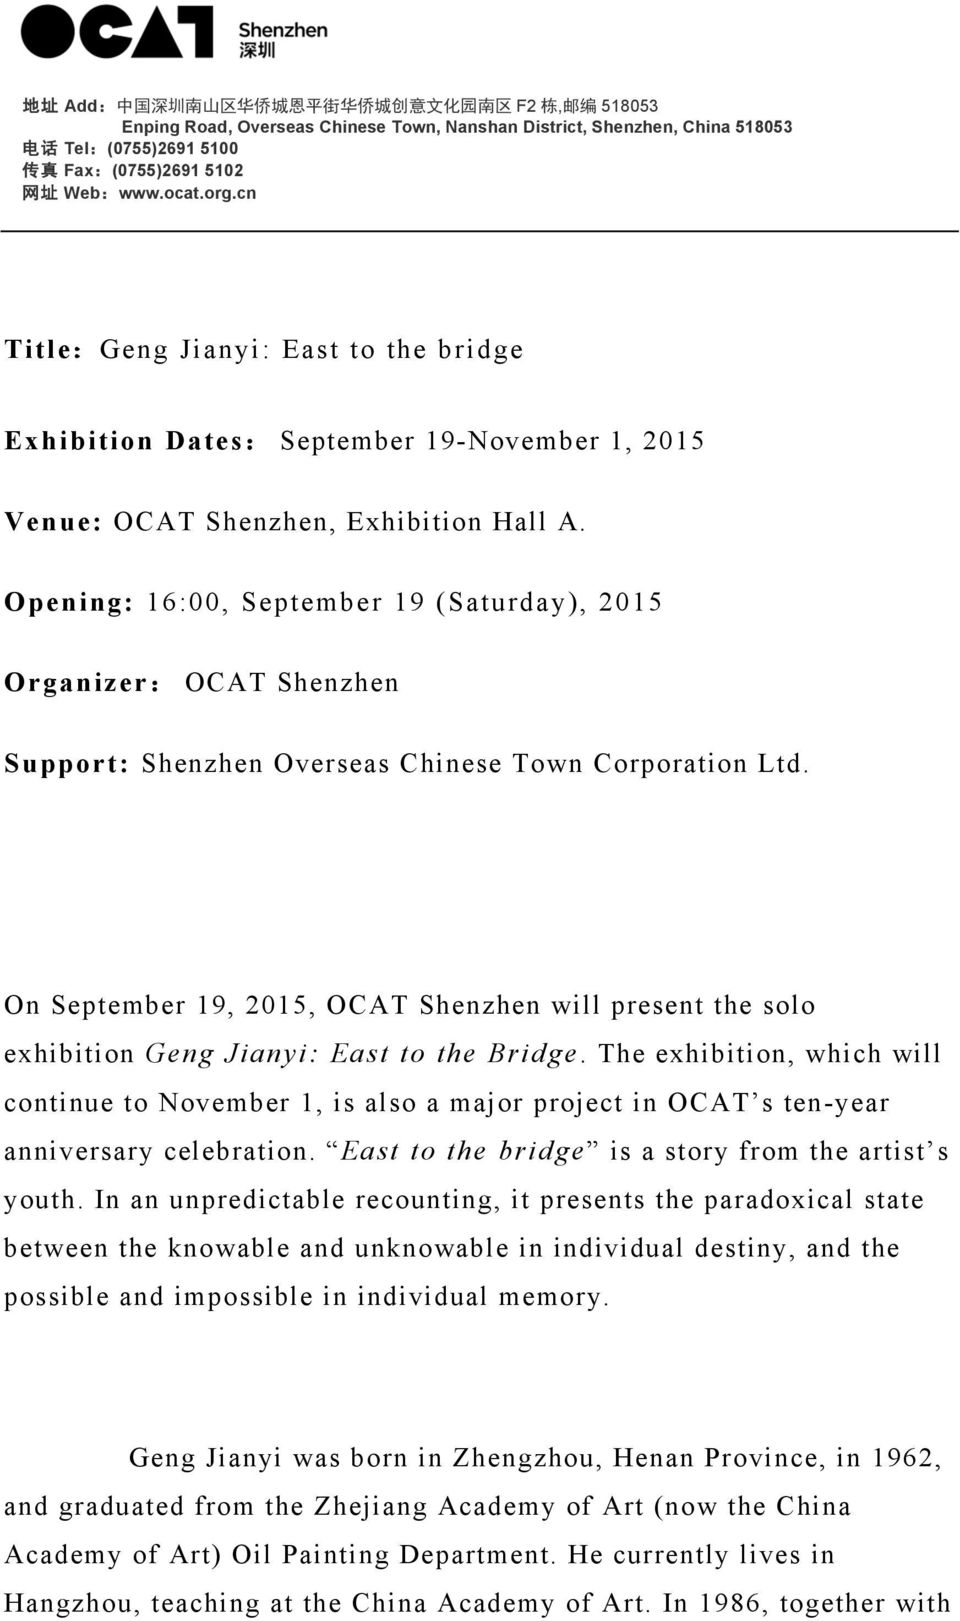 On September 19, 2015, OCAT Shenzhen will present the solo exhibition Geng Jianyi: East to the Bridge.